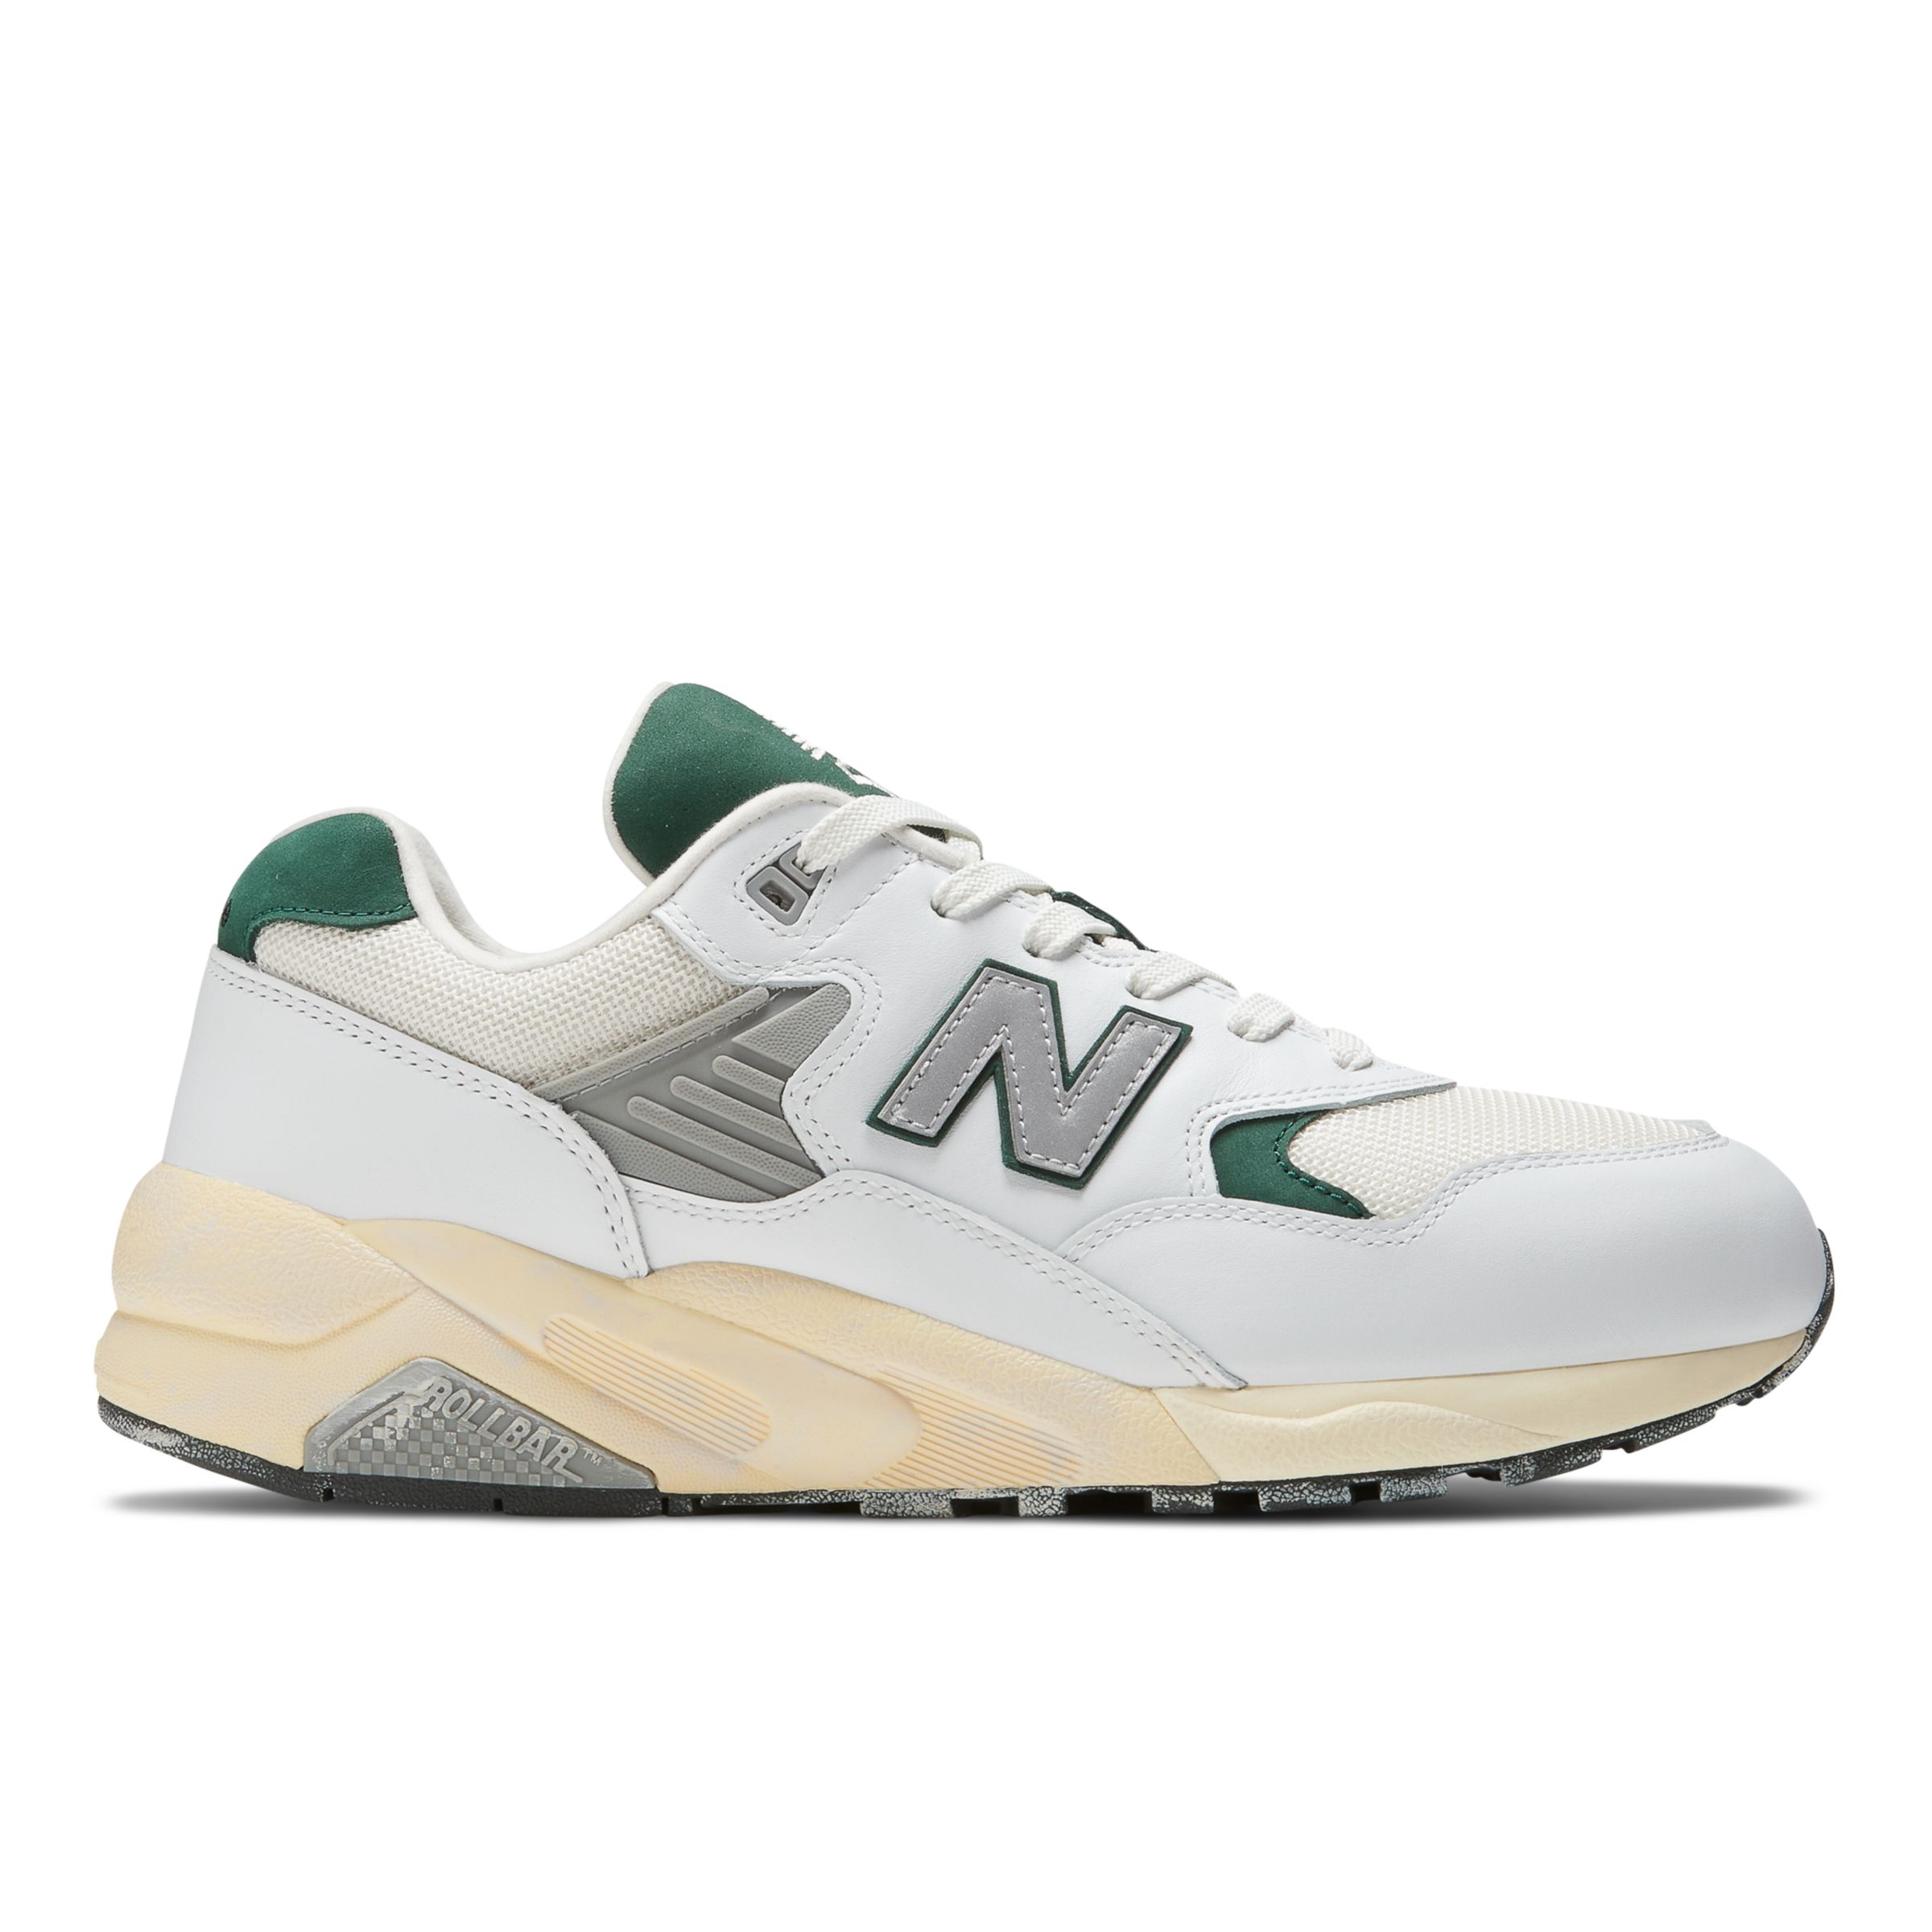 New Balance Homme 580 en Blanc/Vert, Leather, Taille 40 Large